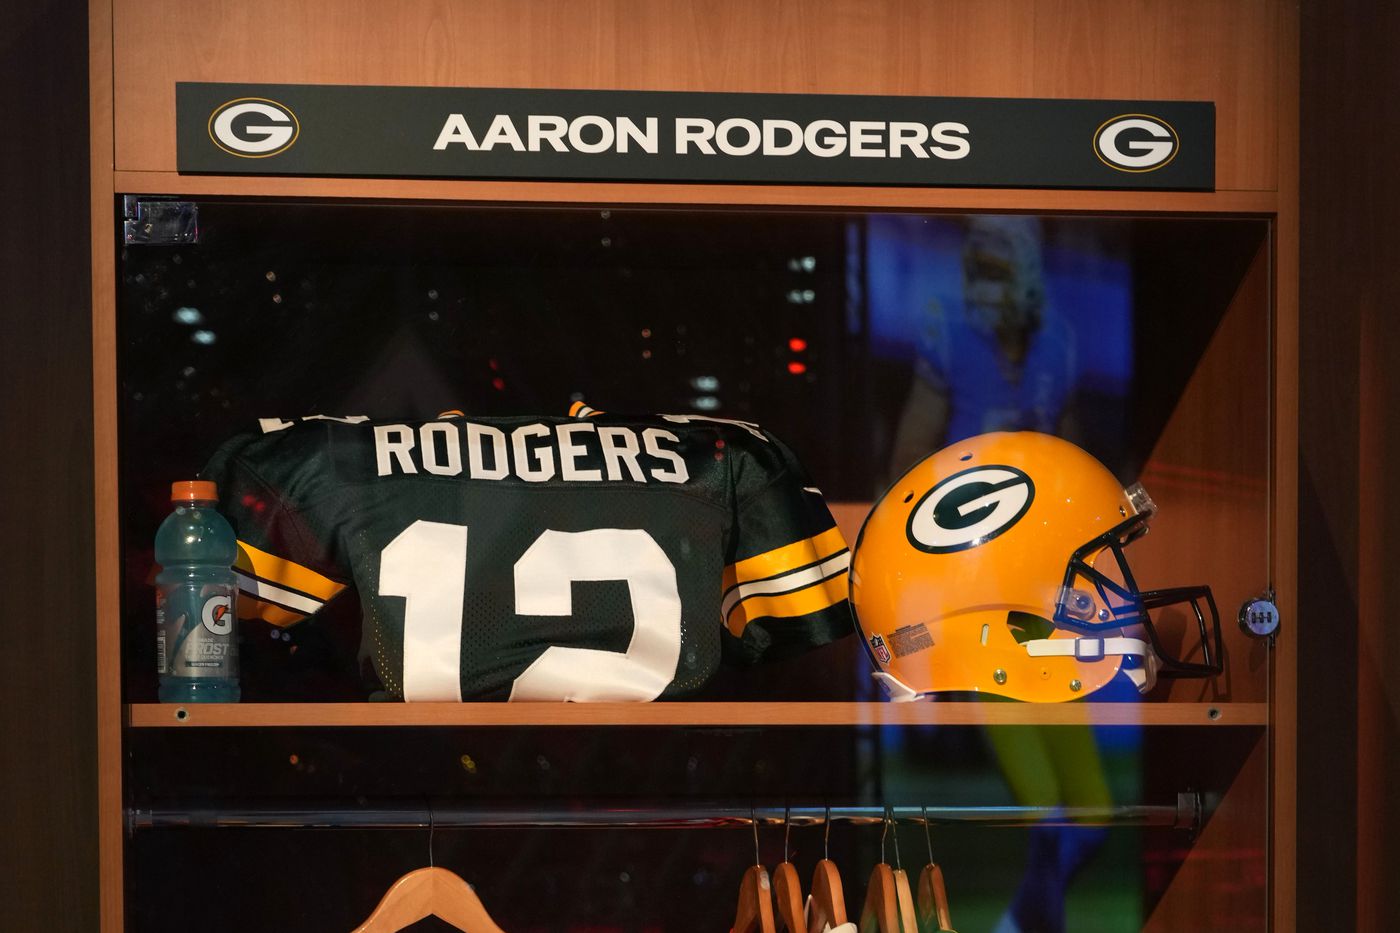 Aaron Rodgers wins 2021 NFL MVP award, earning 2nd straight & 4th overall -  Acme Packing Company